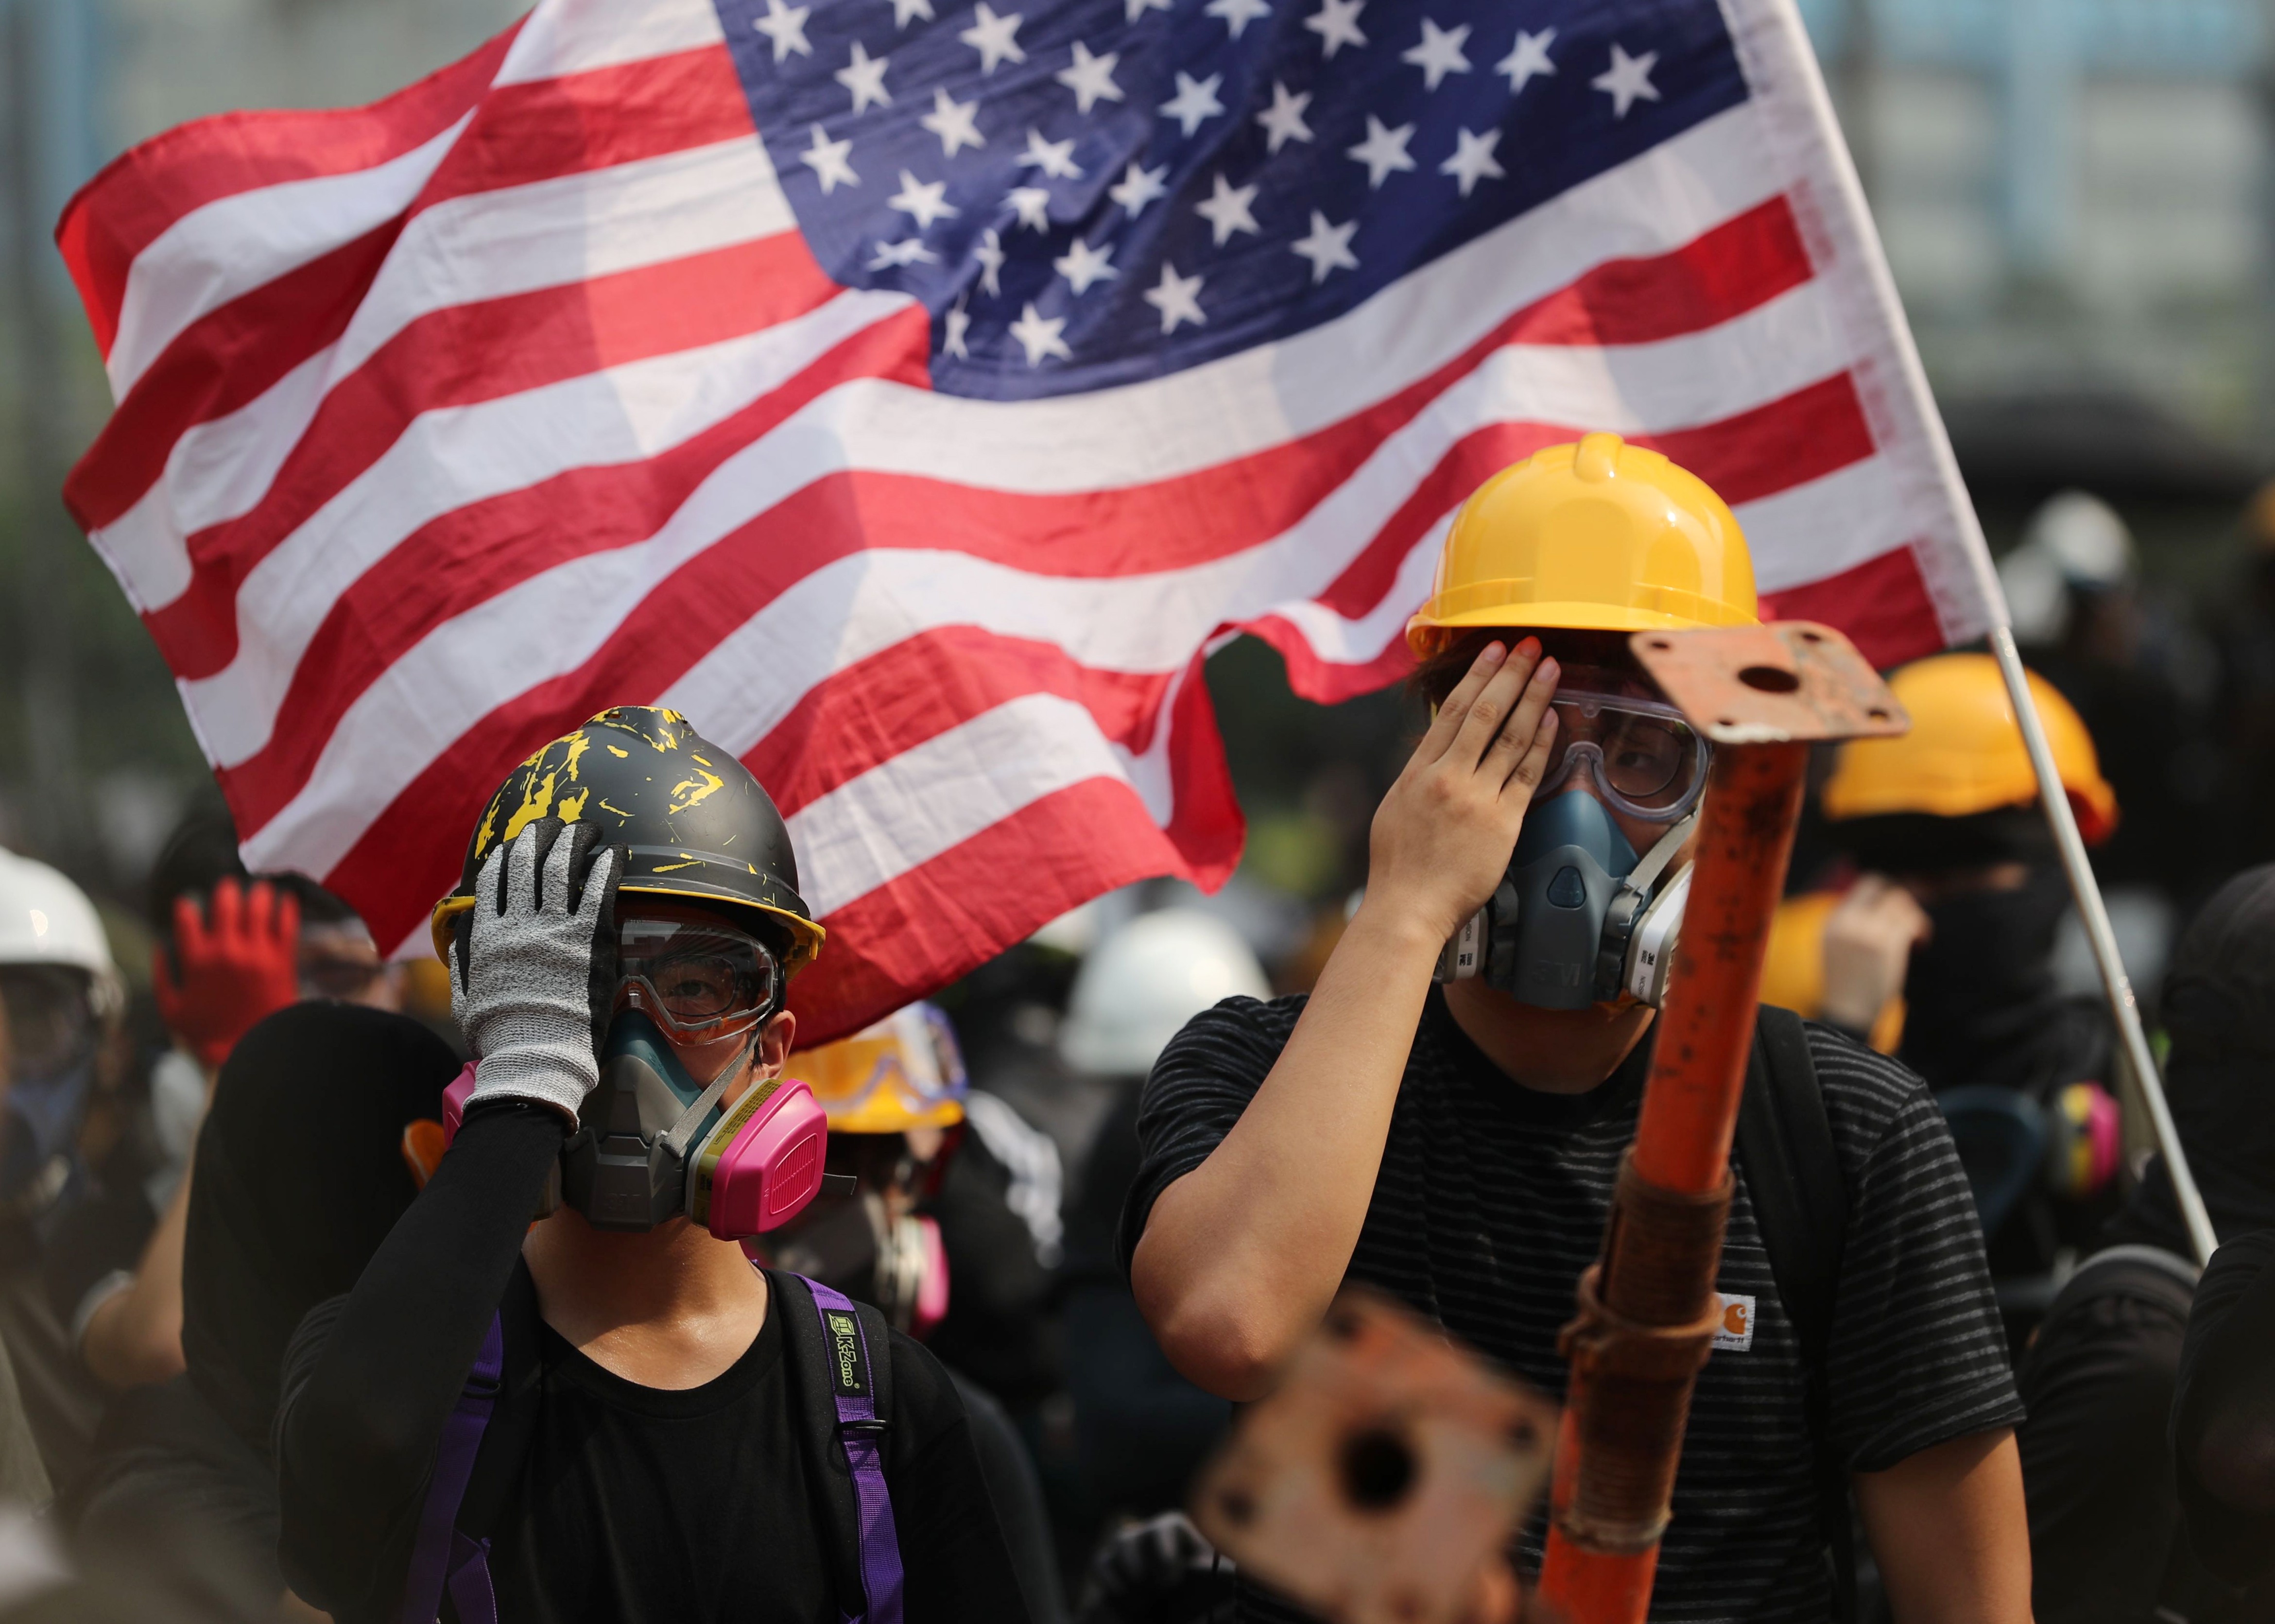 Protesters in the Ngau Tau Kok area of Hong Kong on August 24 wave the US flag, as others cover their right eye in tribute to a woman who suffered a serious eye injury during anti-government protests outside a police station two weeks before. Photo: Sam Tsang